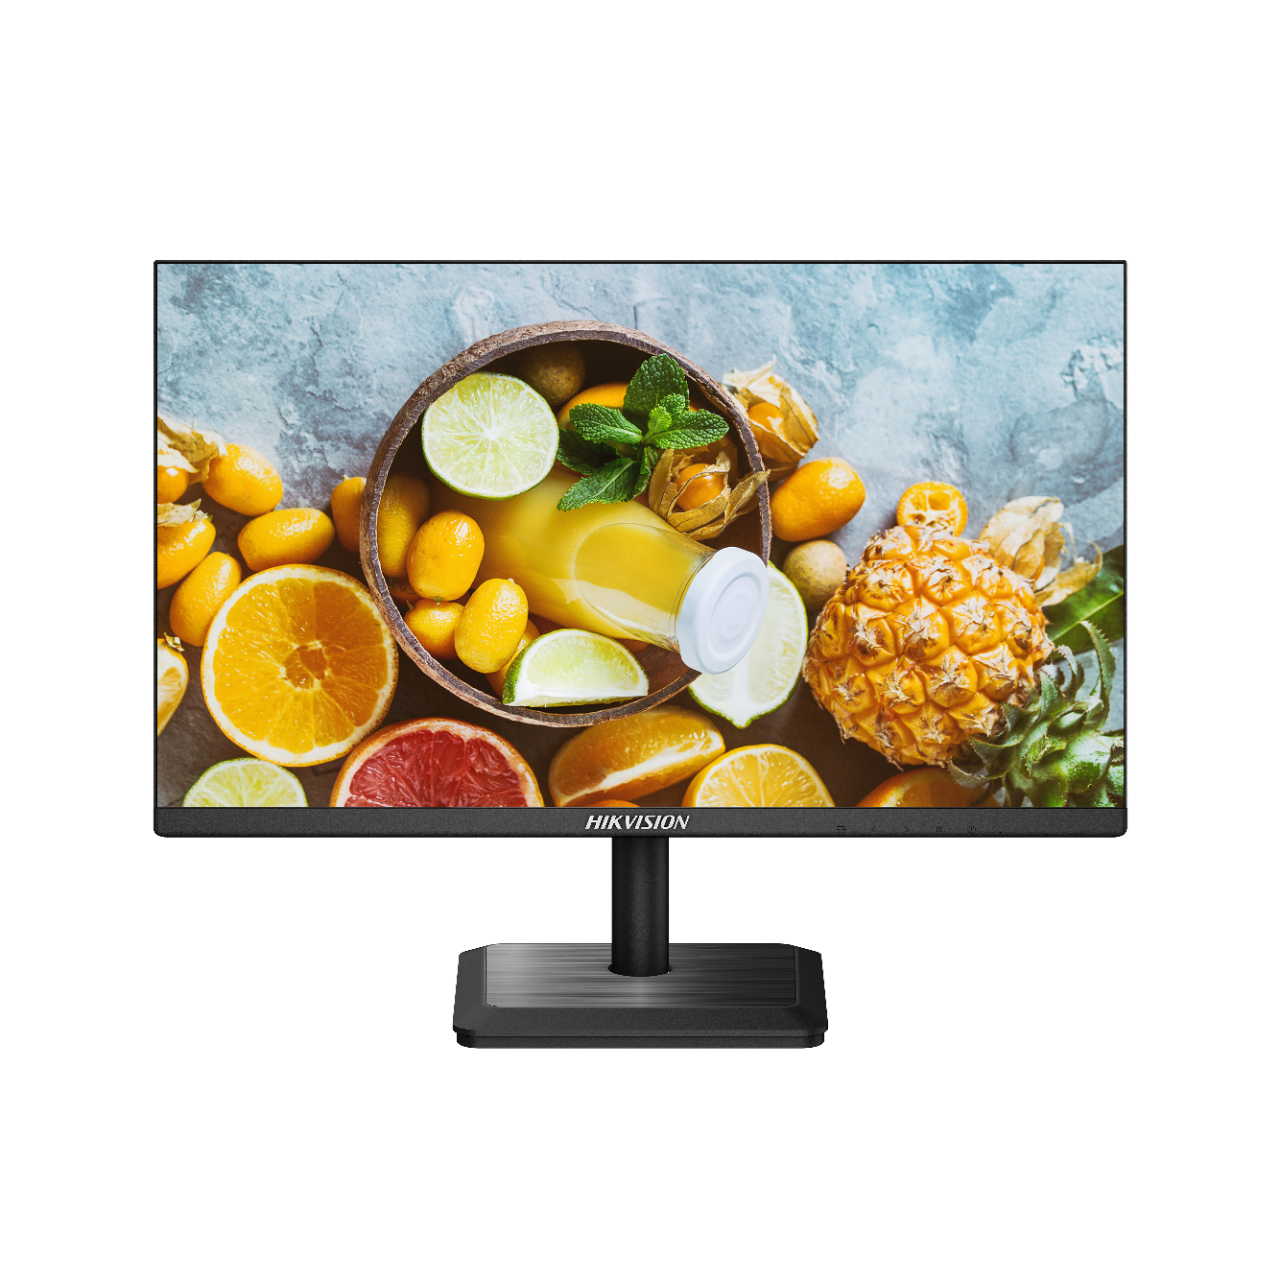 Picture of DS-D5024FC-C 23.8" E-LED Monitor Hikvision